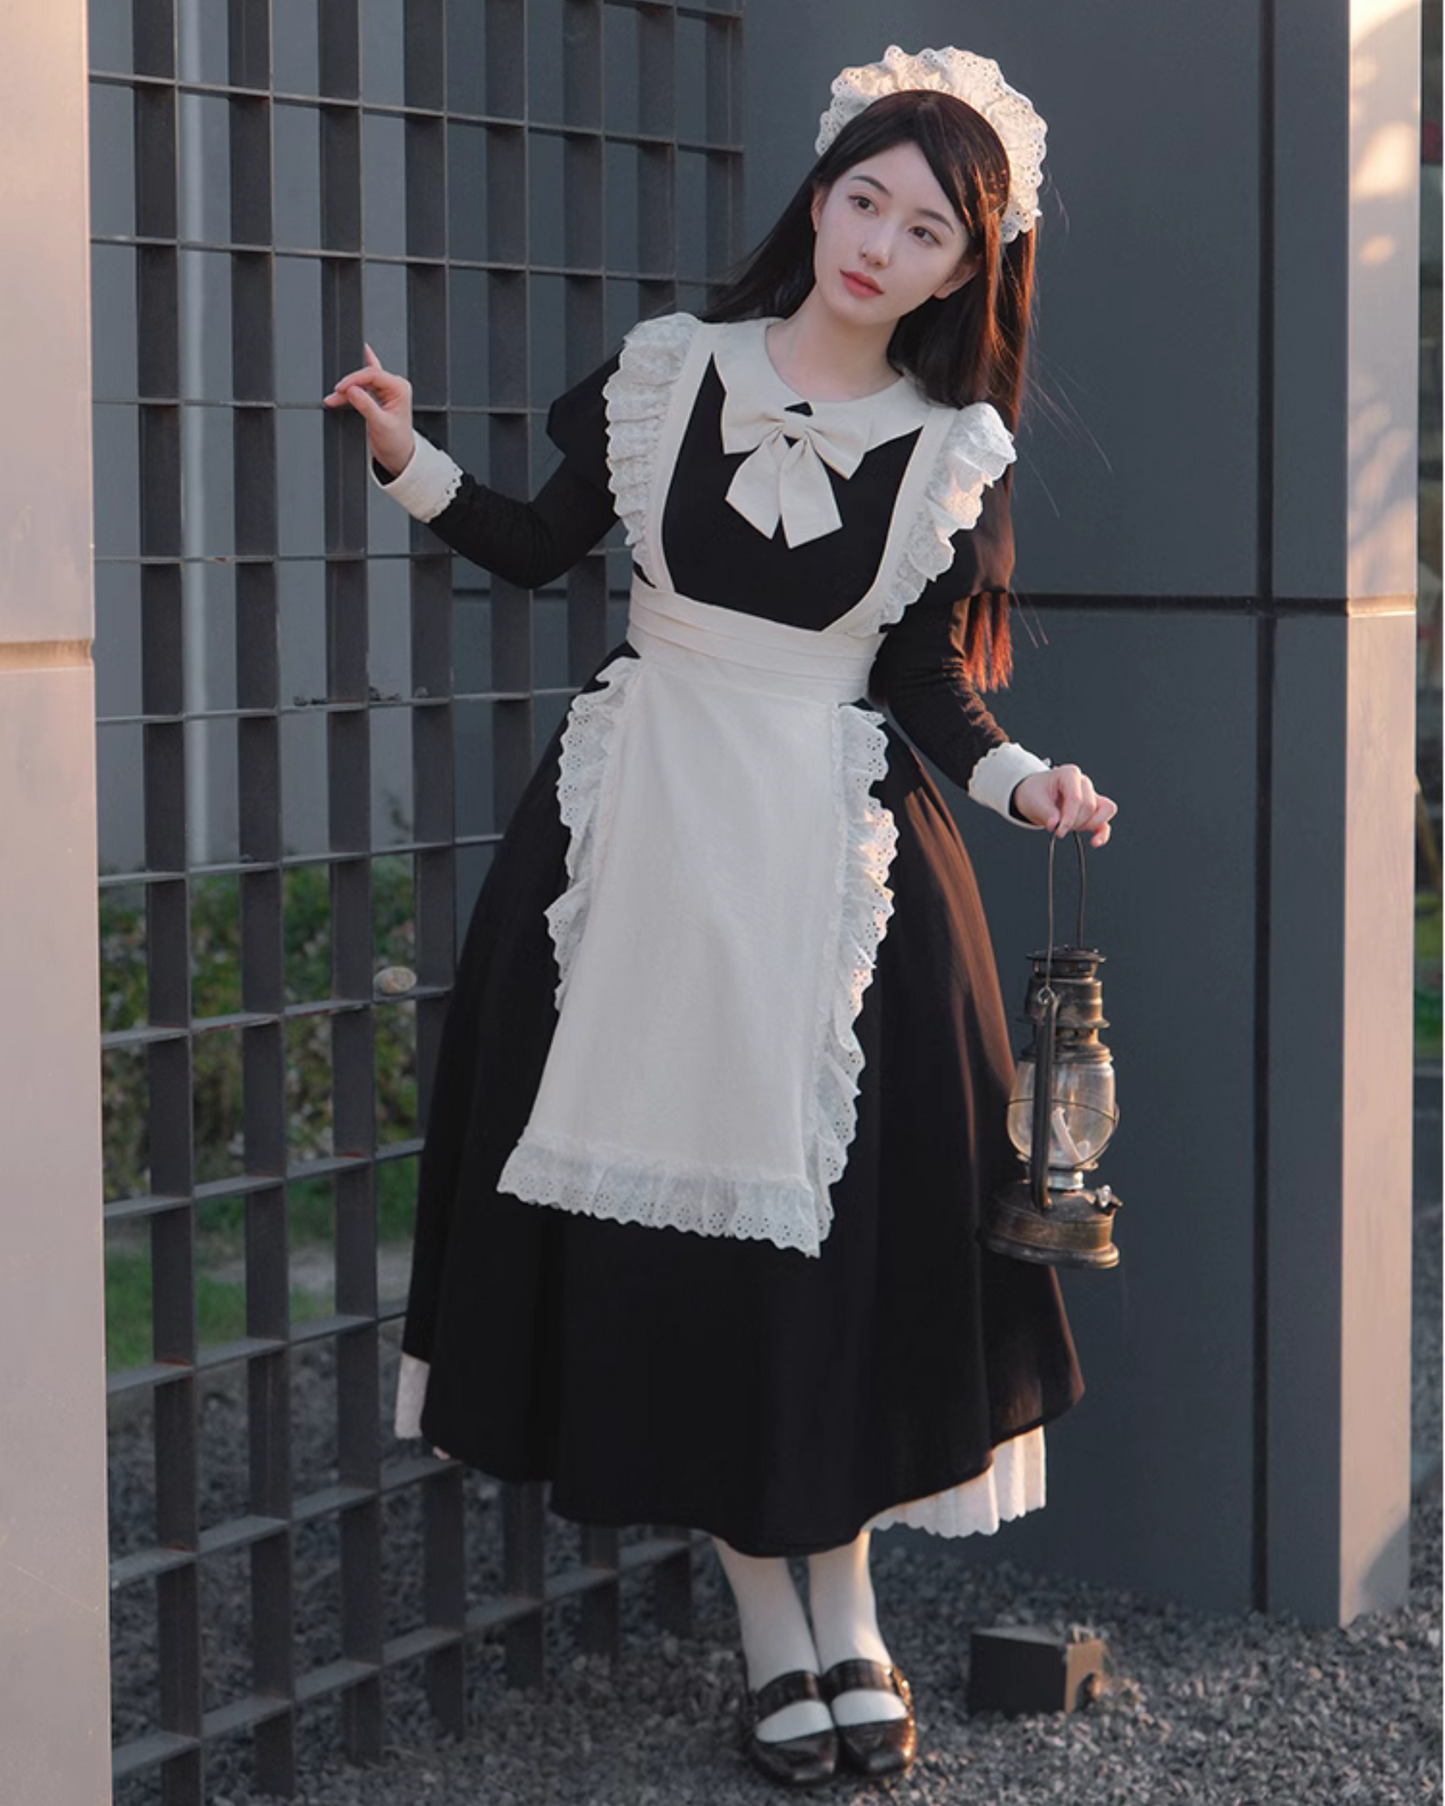 2-way apron maid-style dress, long length, with attached sleeves